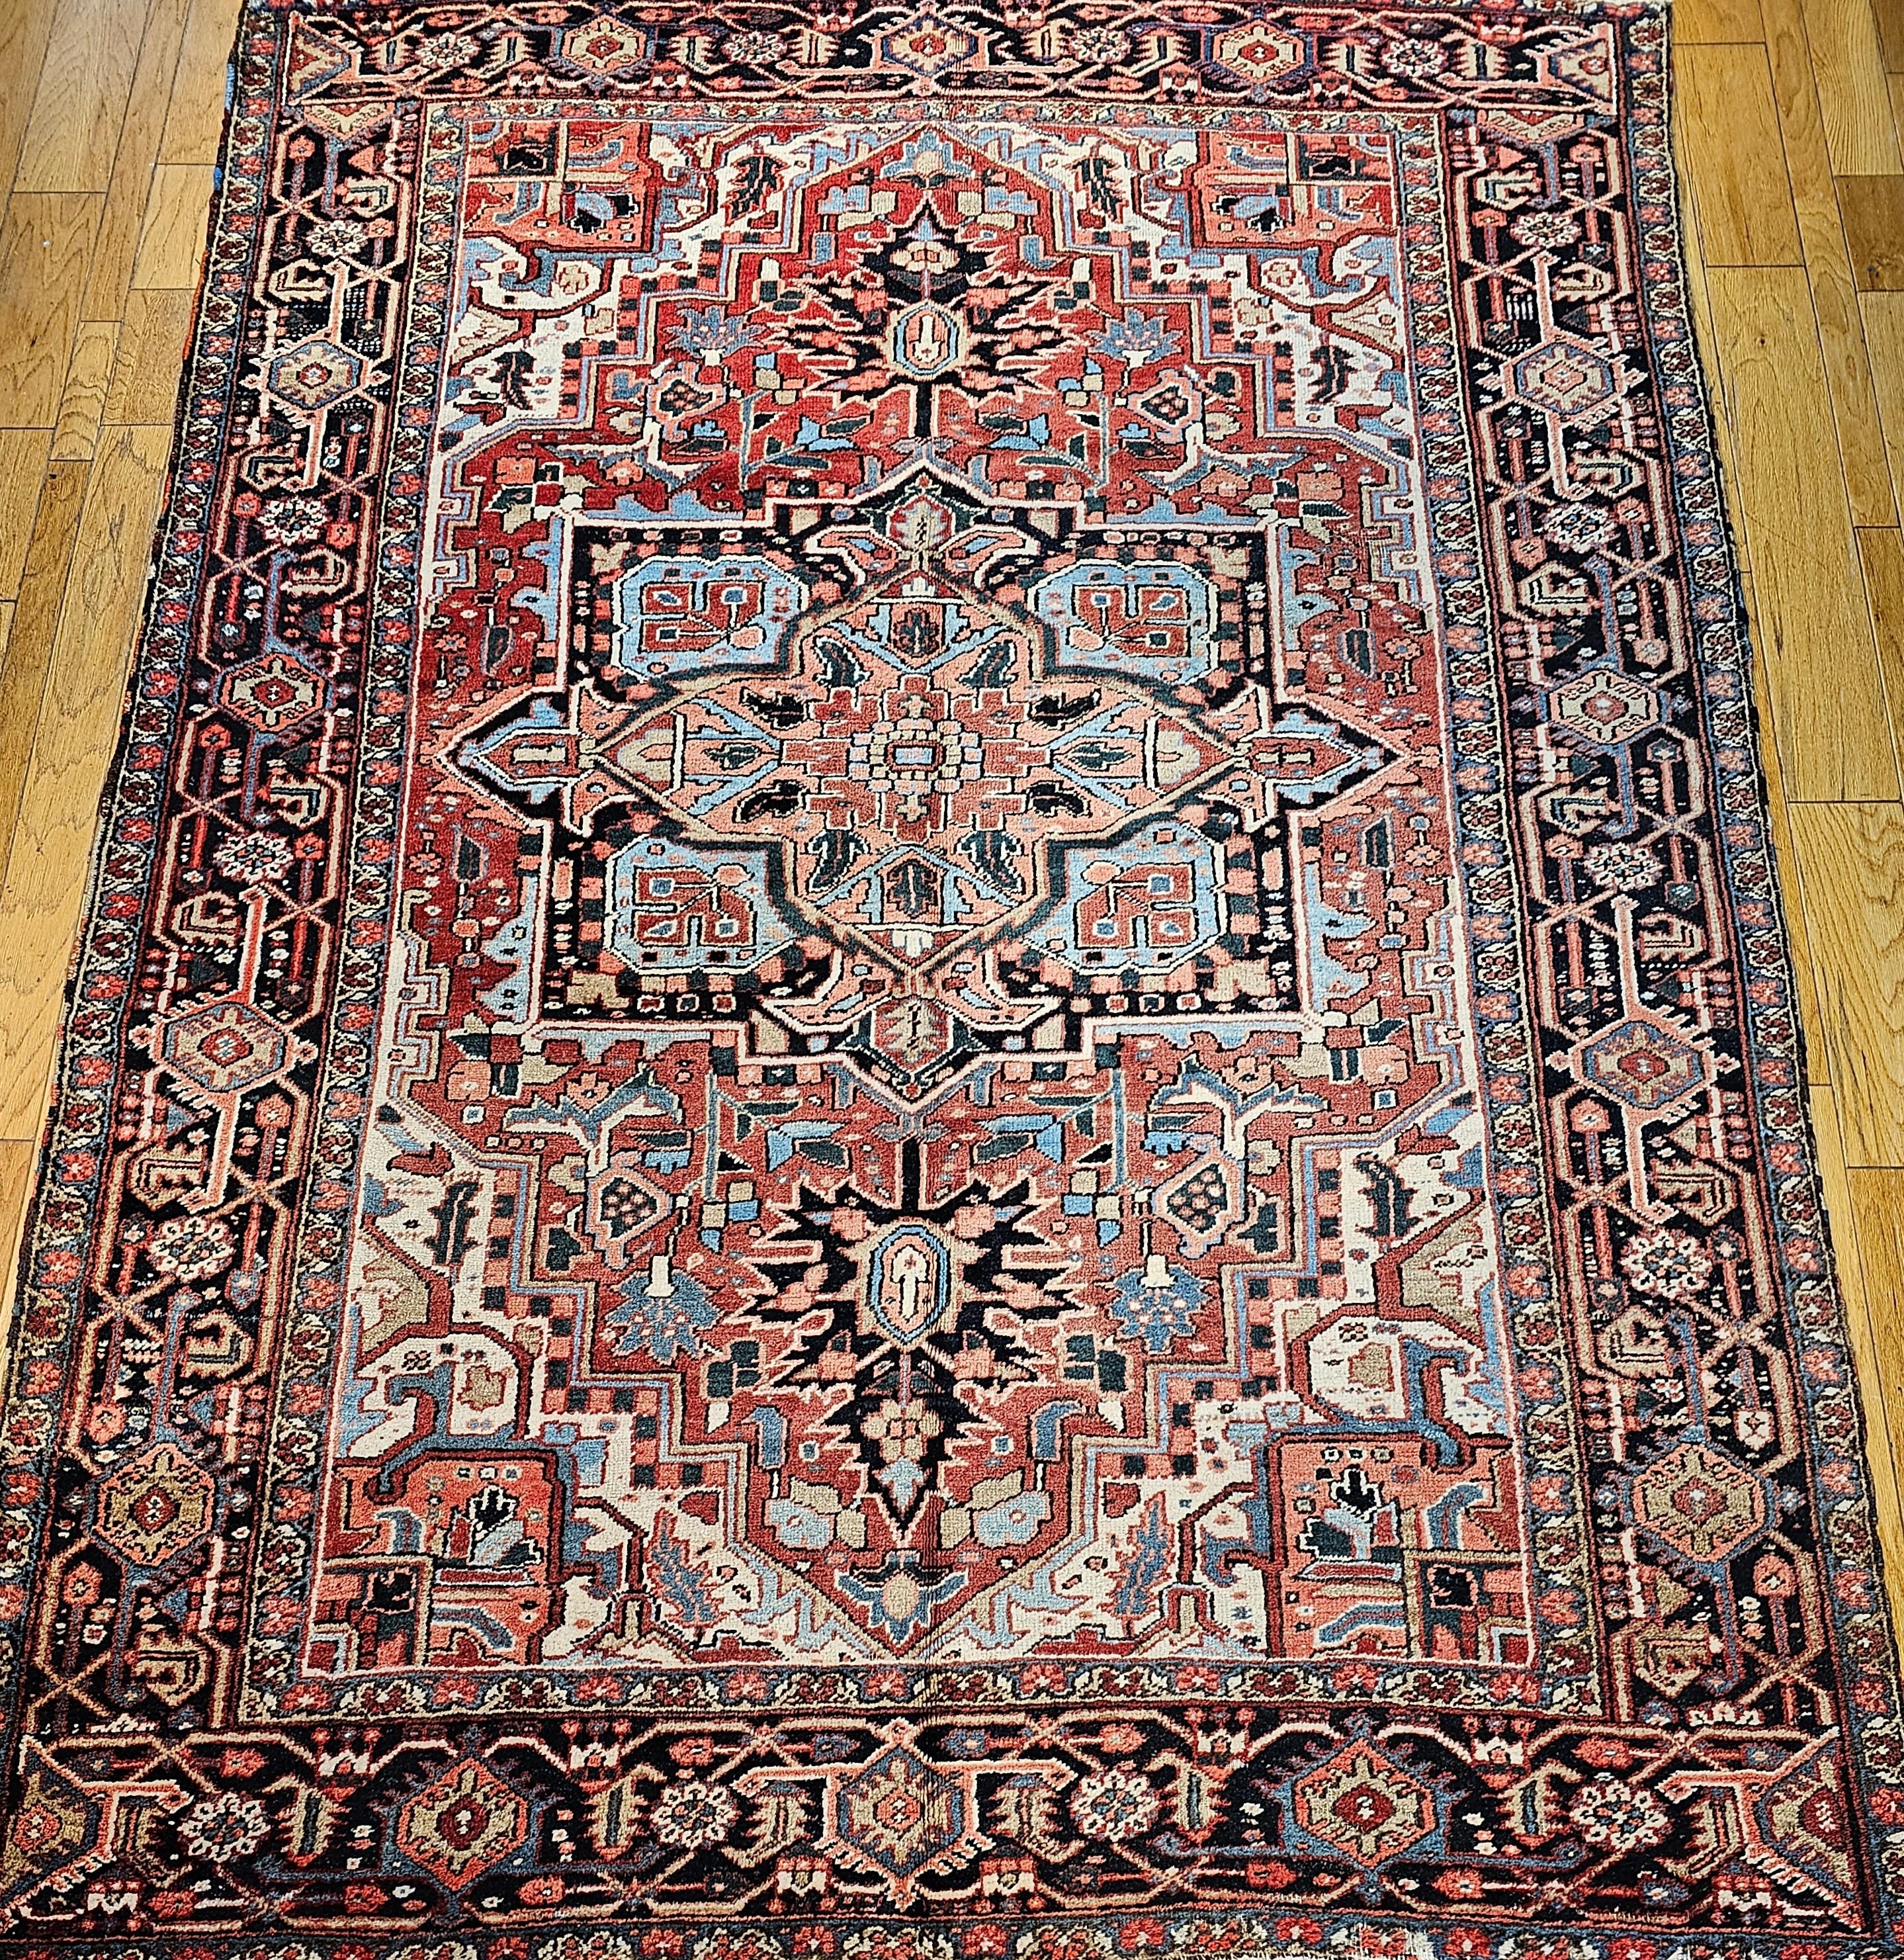 The antique room-size Heriz rug with Serapi design and colors from NW Persia from the early 20th century.  This Heriz has a brick red color field with wonderful “abrash” colors in green, light blue, pink, and yellow designs through the field and